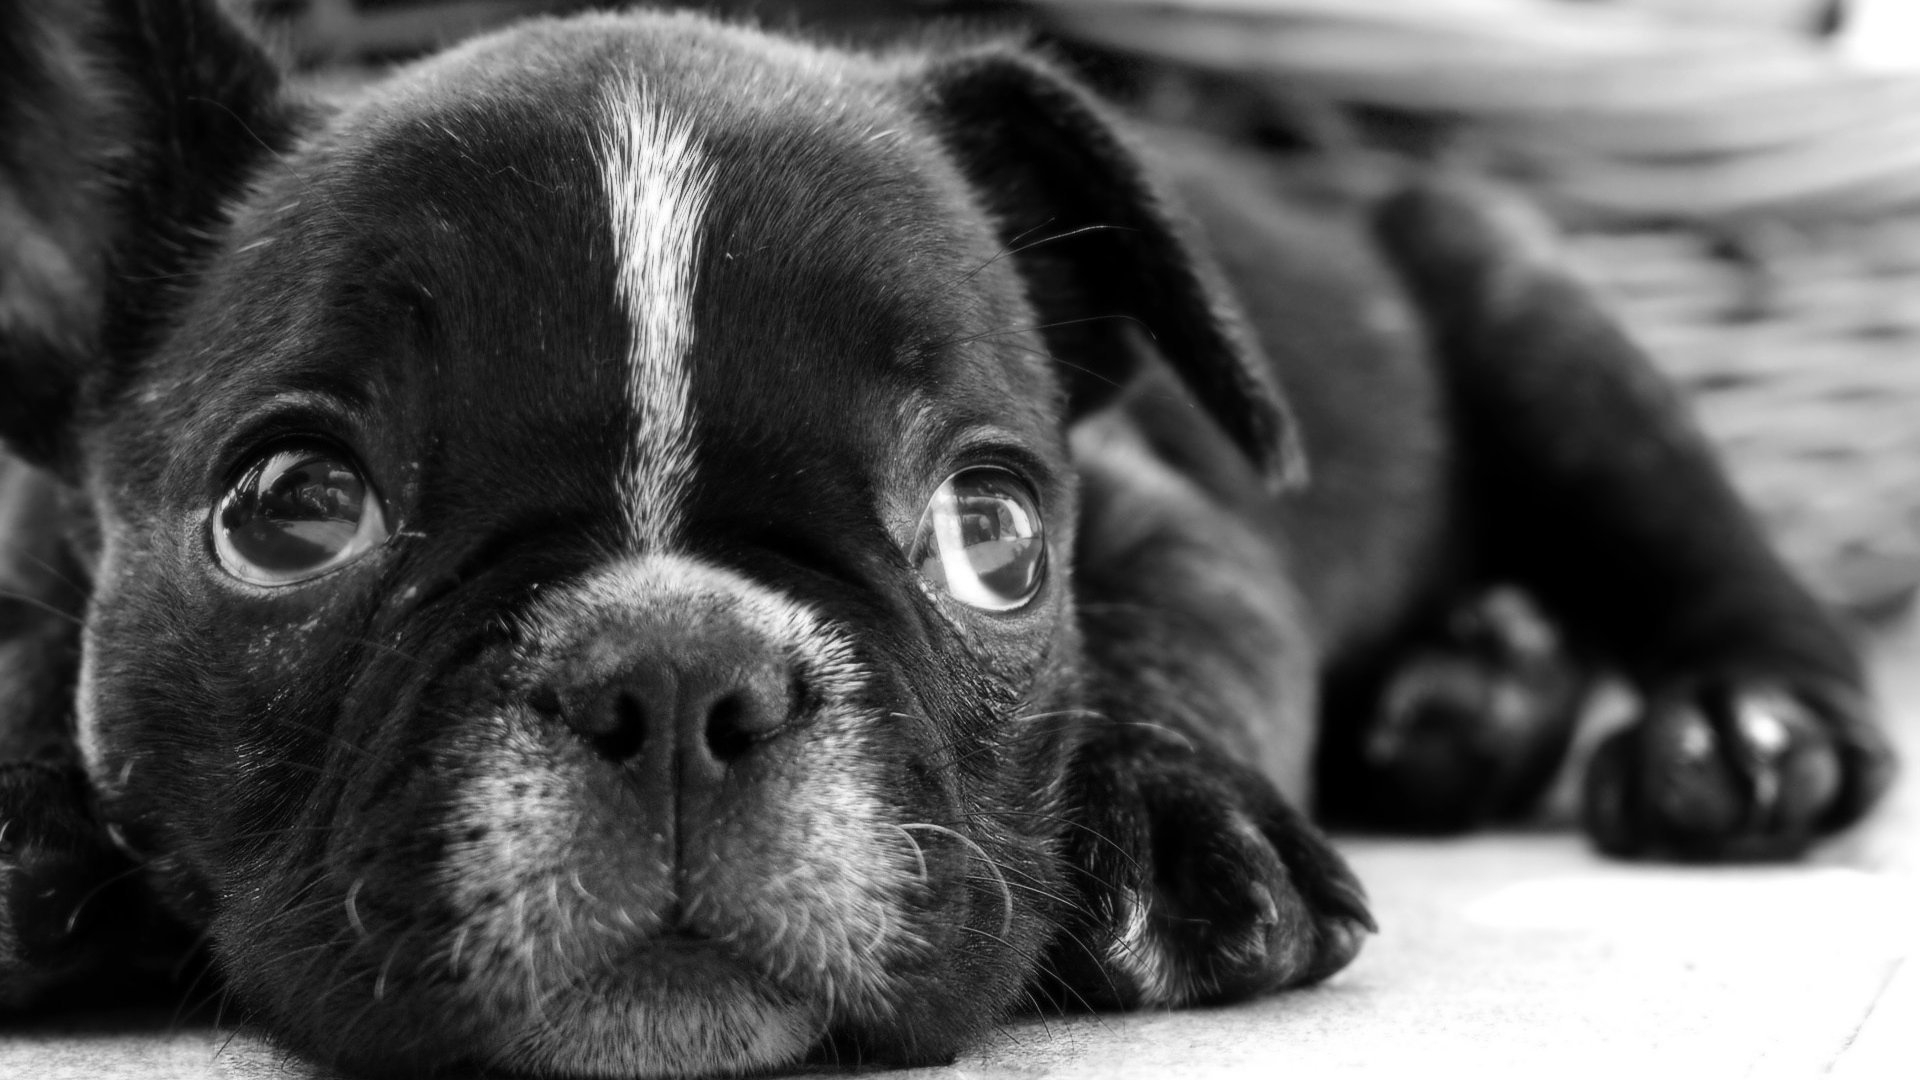 Dog lost in thought for 1920 x 1080 HDTV 1080p resolution